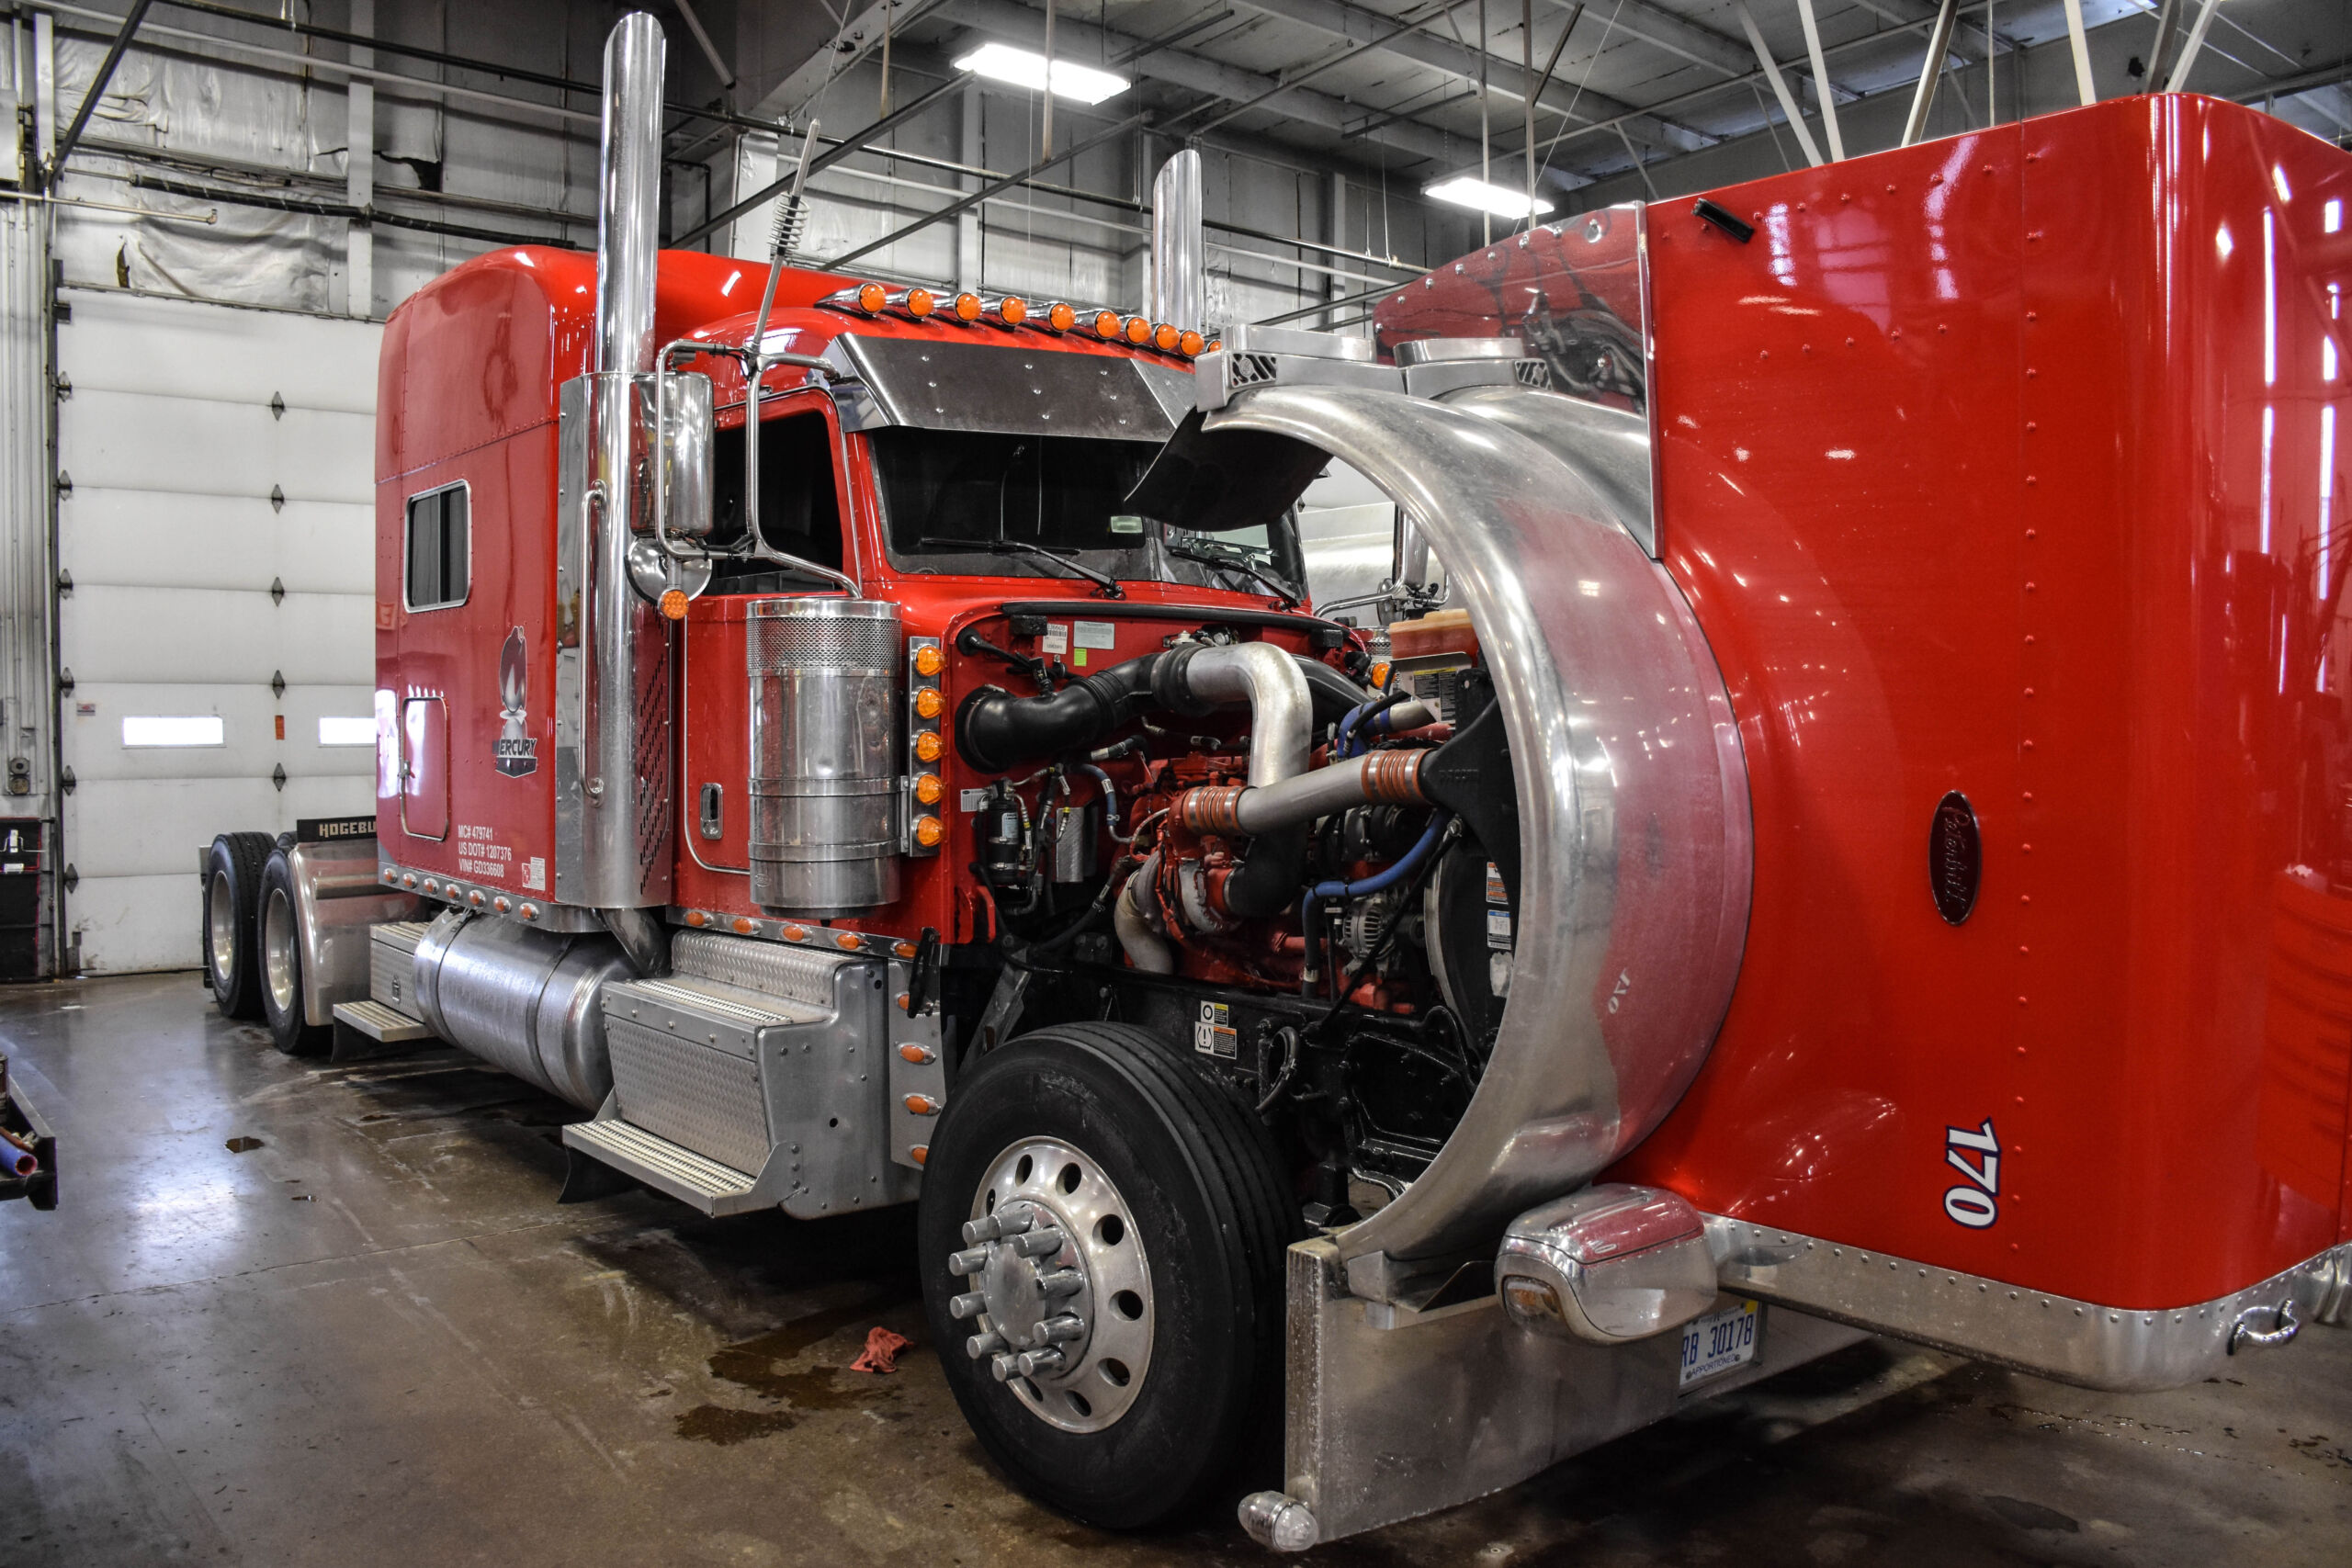 Red Peterbilt truck with open hood in service bay for maintenance to prepare for Cold Weather